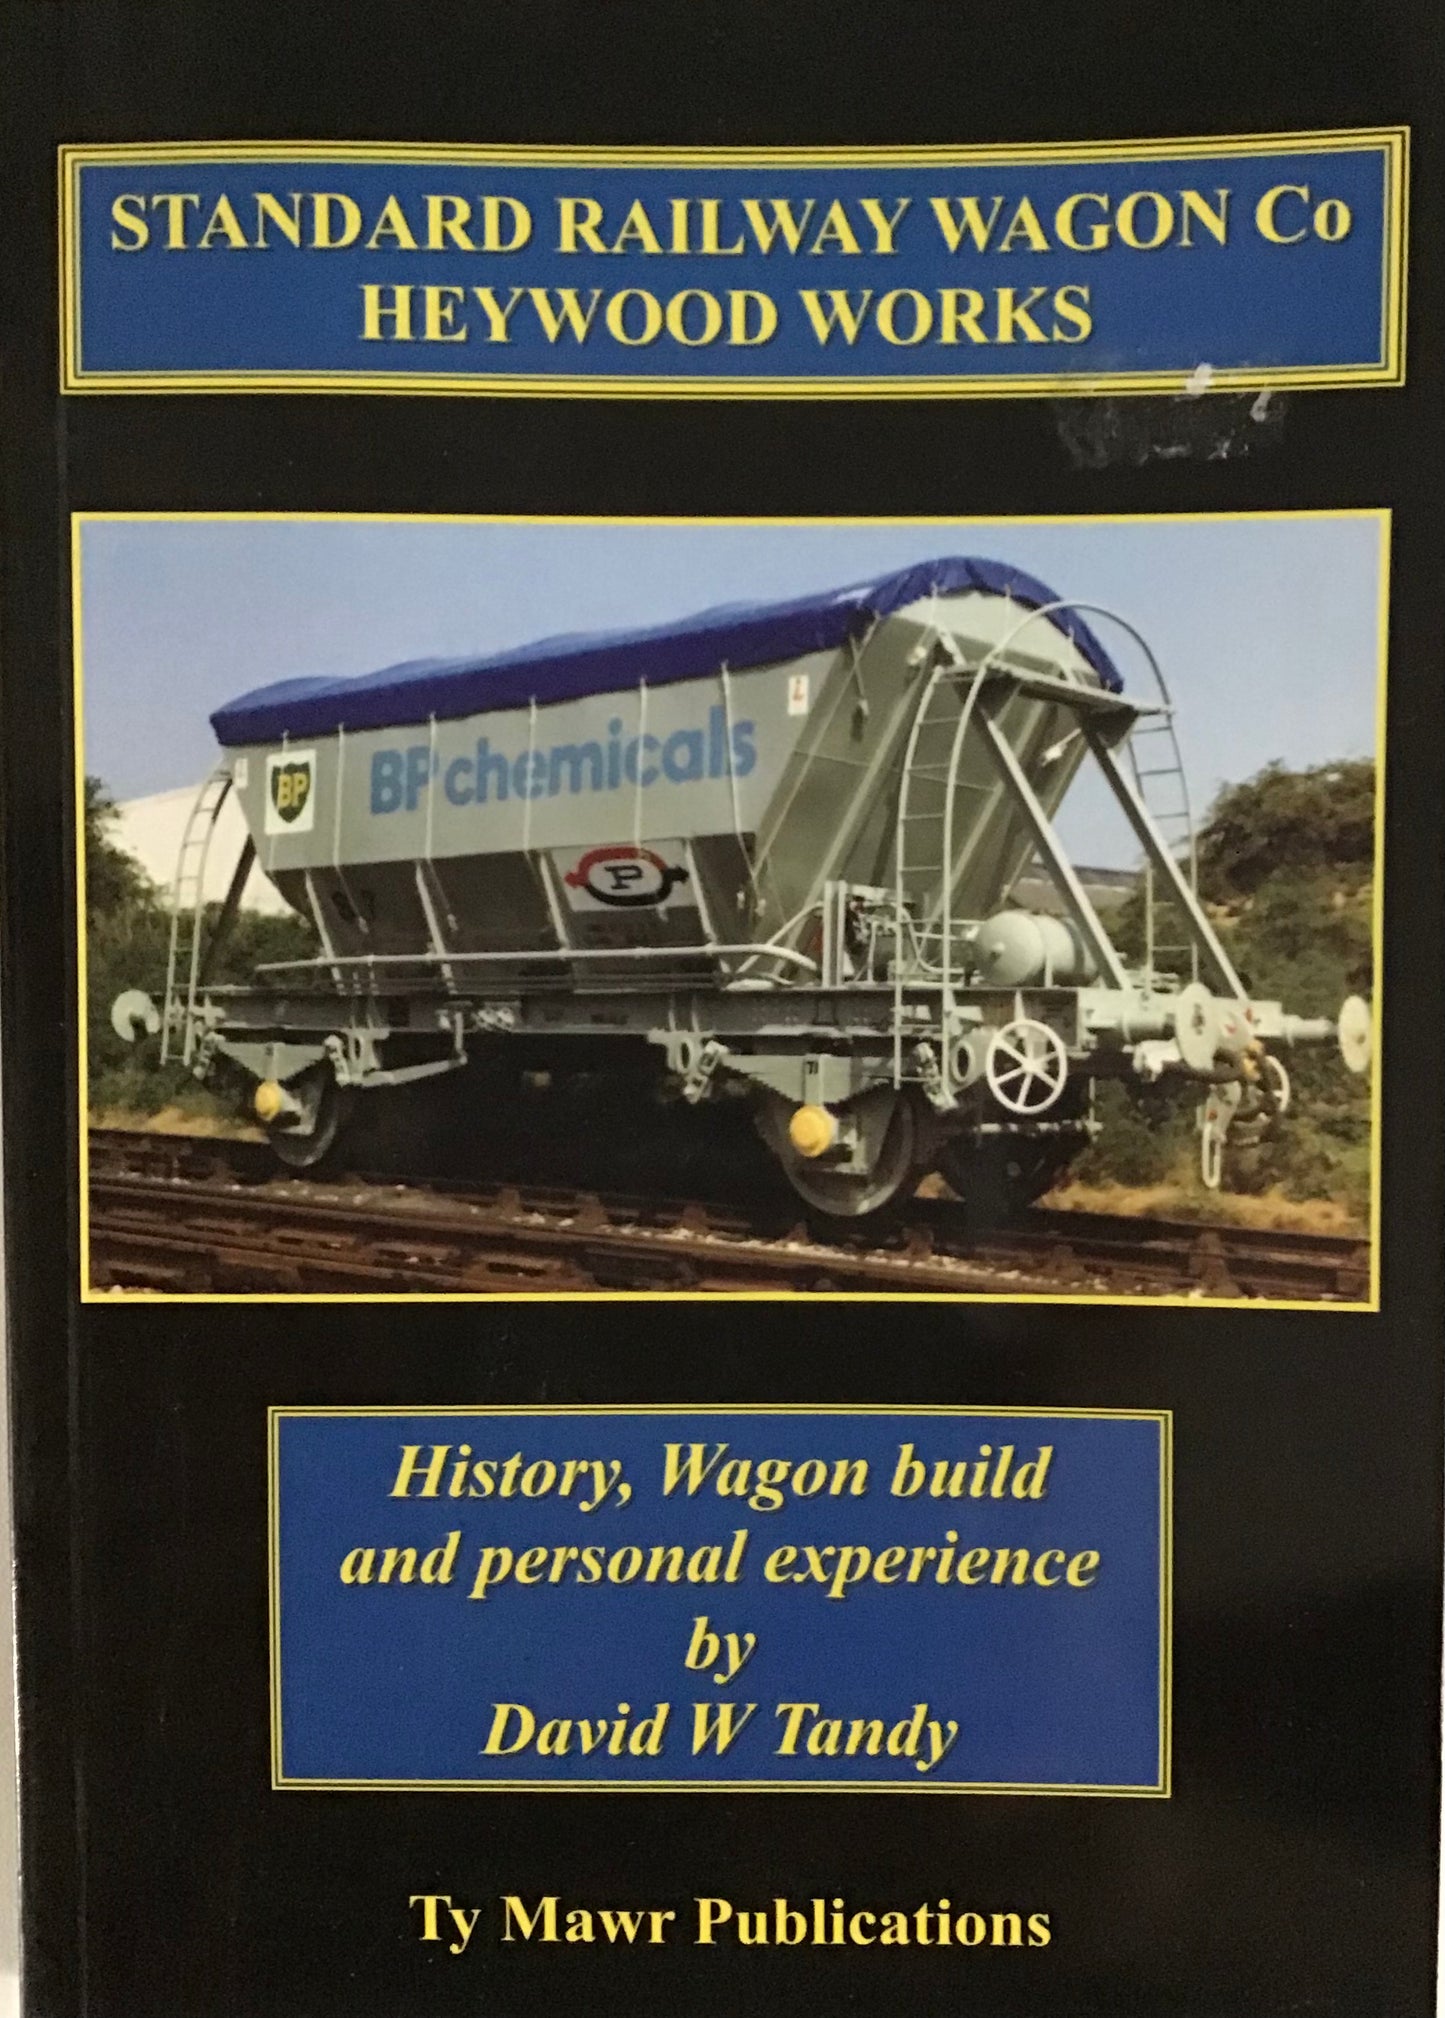 Standard Railway Wagon Co Heywood Works by Ty Mawr Publications - Chester Model Centre